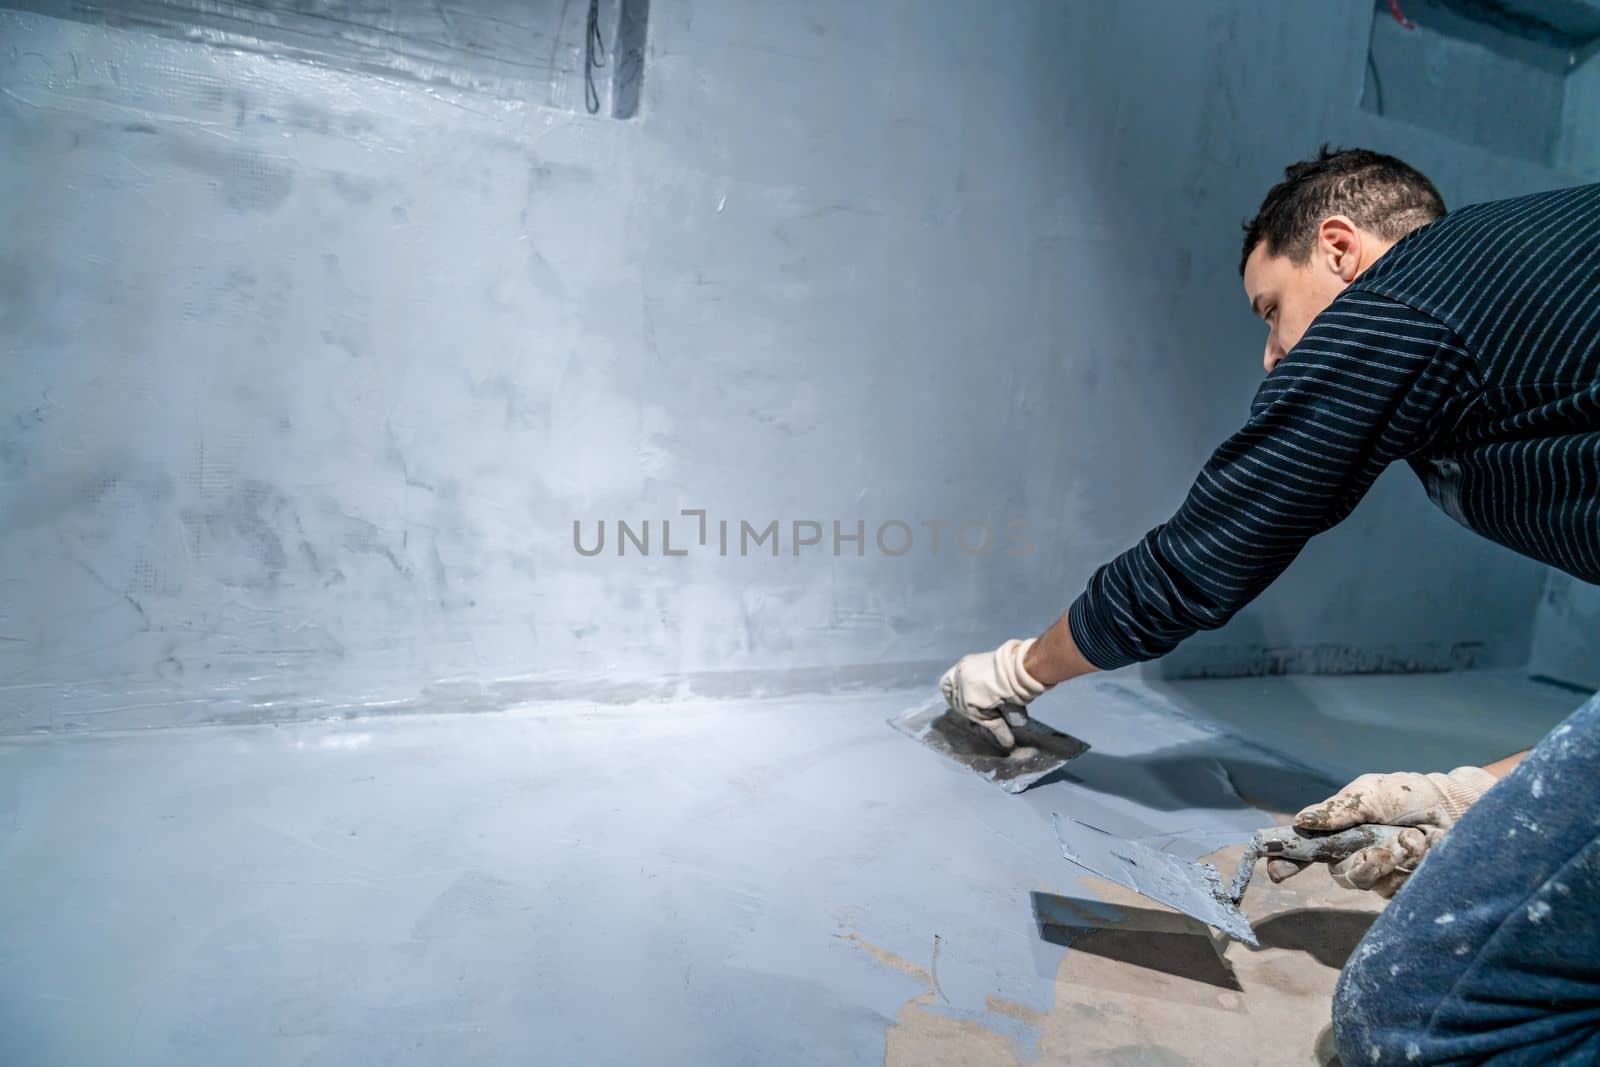 spread the insulation on the concrete floor using a trowel by Edophoto